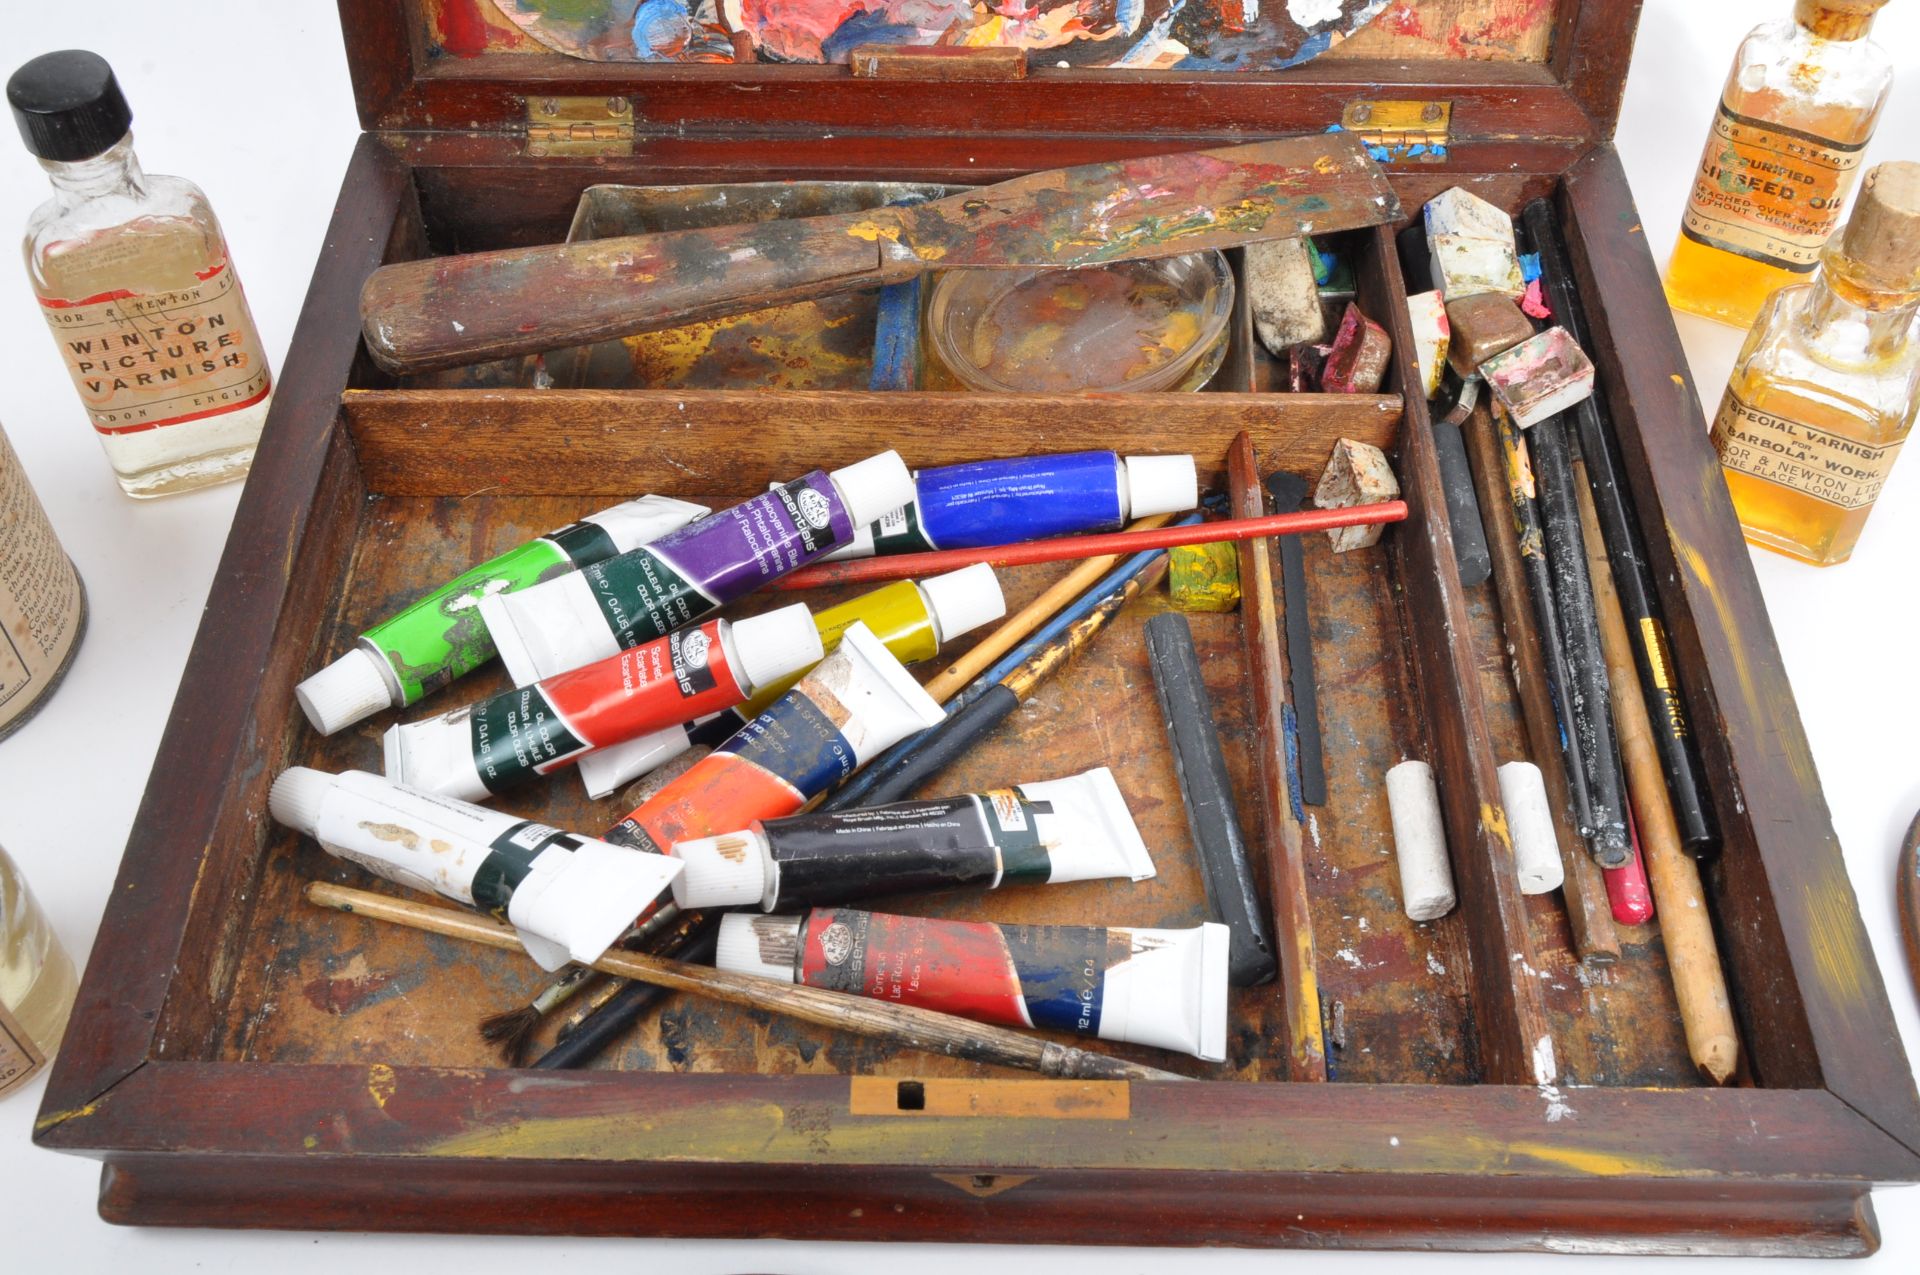 AN EARLY 20TH CENTURY ARTIST'S PALETTE & PAINTING ACCESSORIES - Image 2 of 4